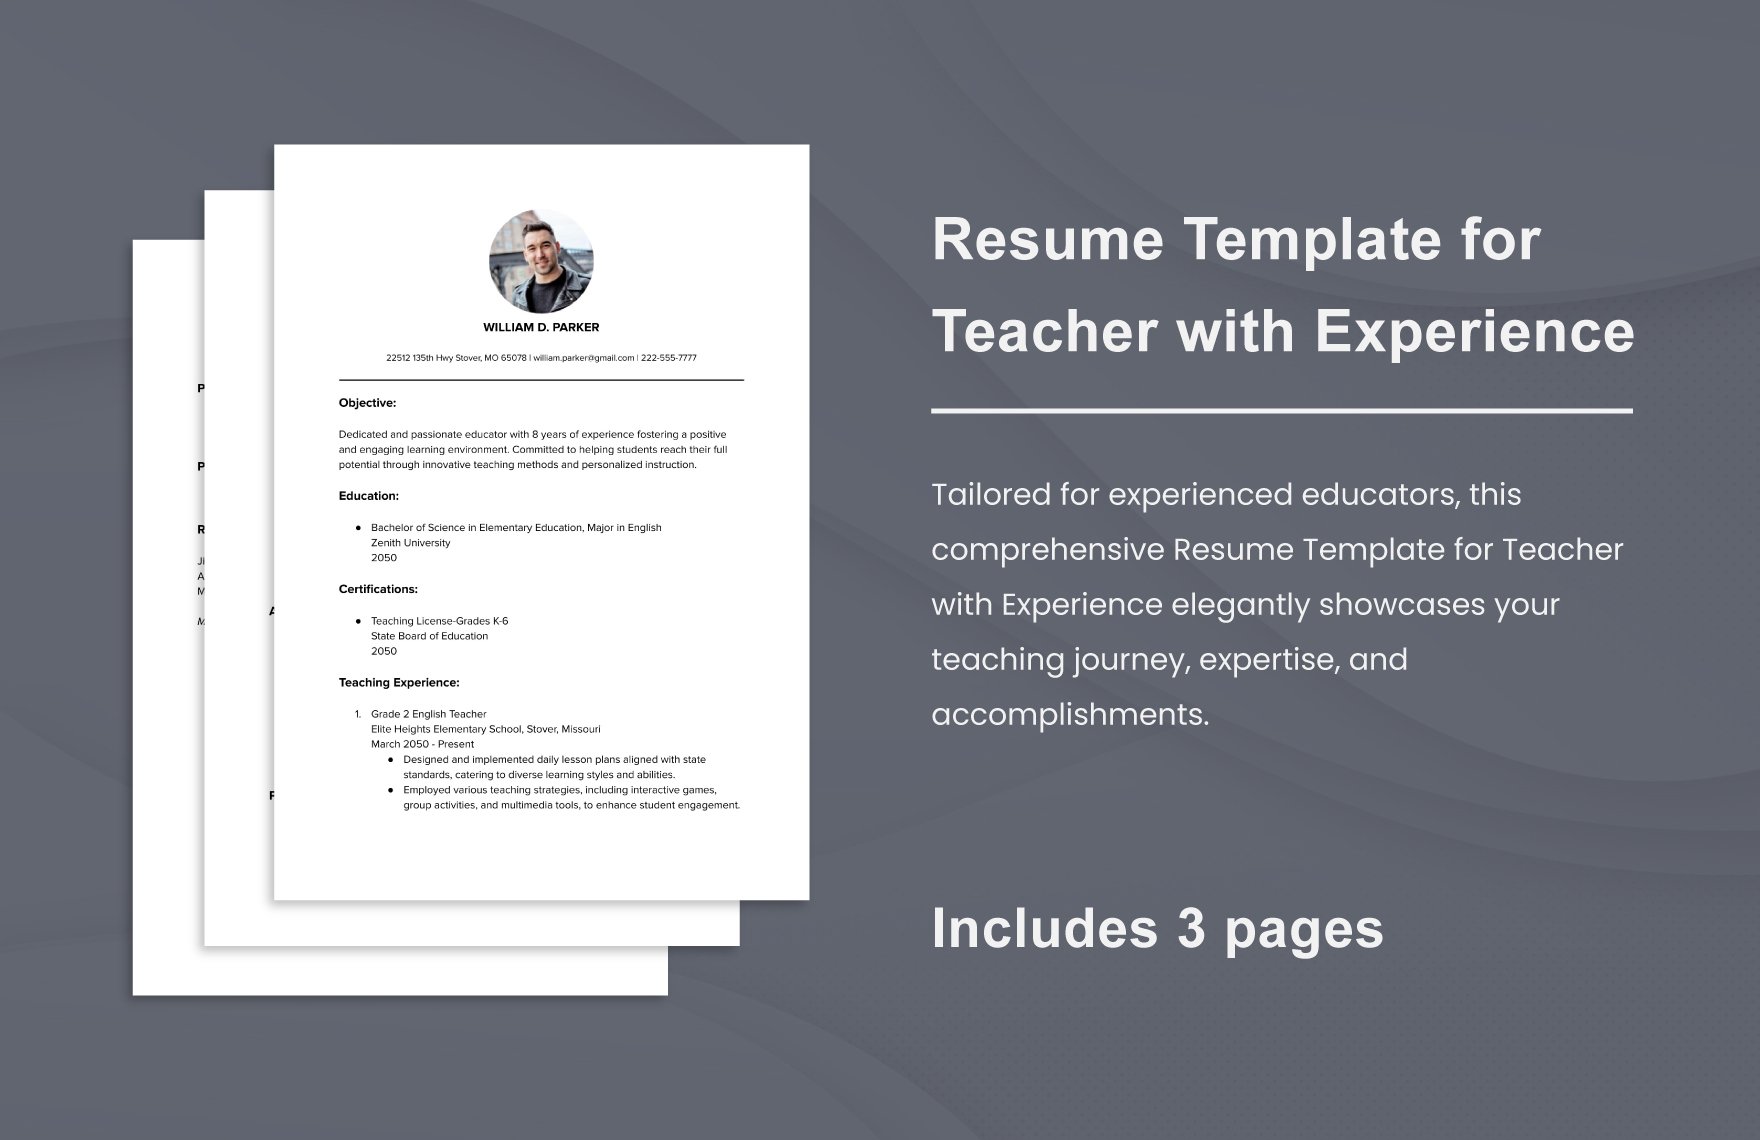 Resume Template for Teacher with Experience